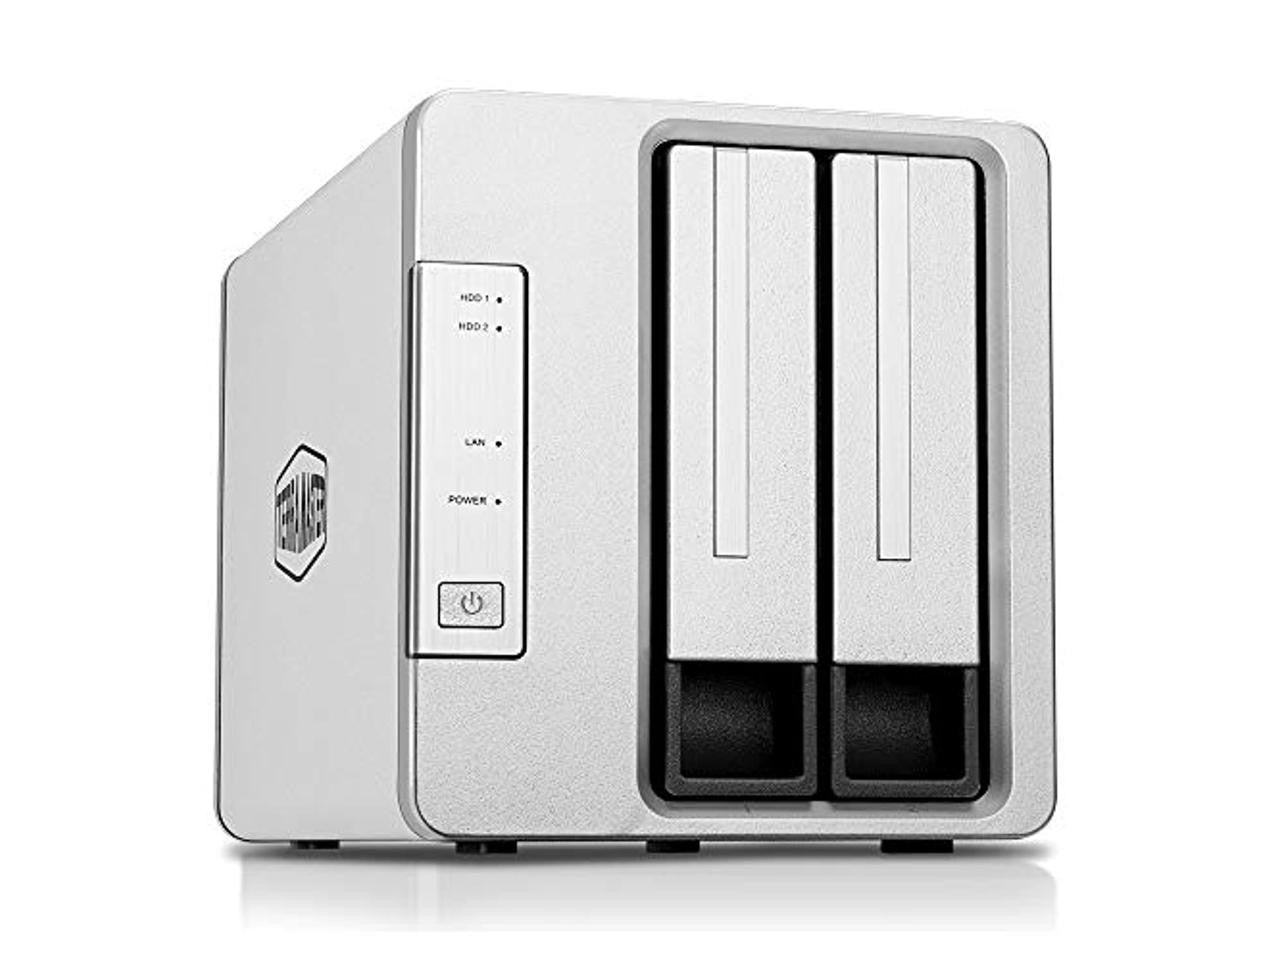 TerraMaster F2-210 2-Bay Home NAS with 24TB (2 x 12TB) of Seagate Ironwolf NAS Drives Fully Assembled and Tested